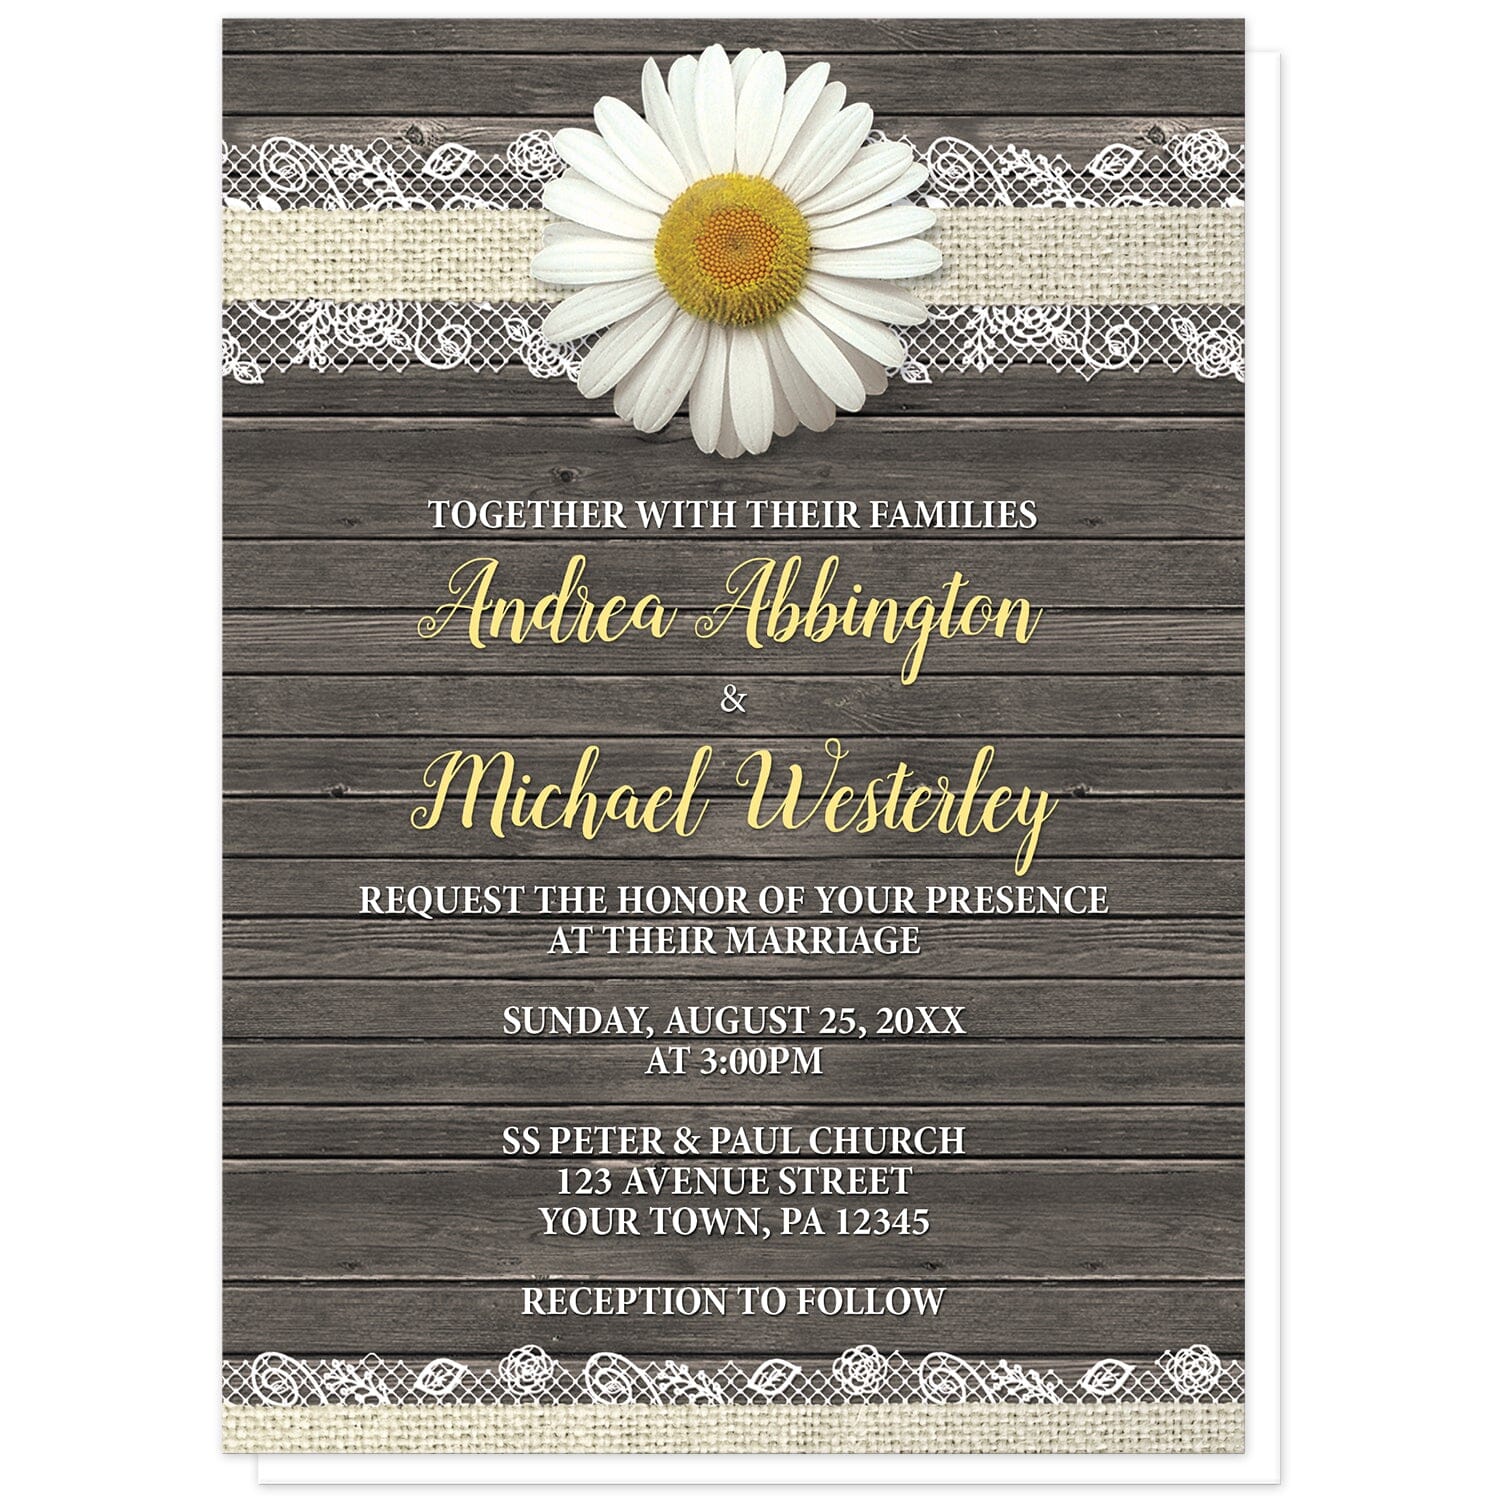 Daisy Burlap and Lace Wood Wedding Invitations at Artistically Invited. Southern rustic daisy burlap and lace wood wedding invitations with a white daisy flower centered at the top on a burlap and lace ribbon strip illustration, over a brown country wood background. Your personalized marriage celebration details are custom printed in yellow and white over the wood design.